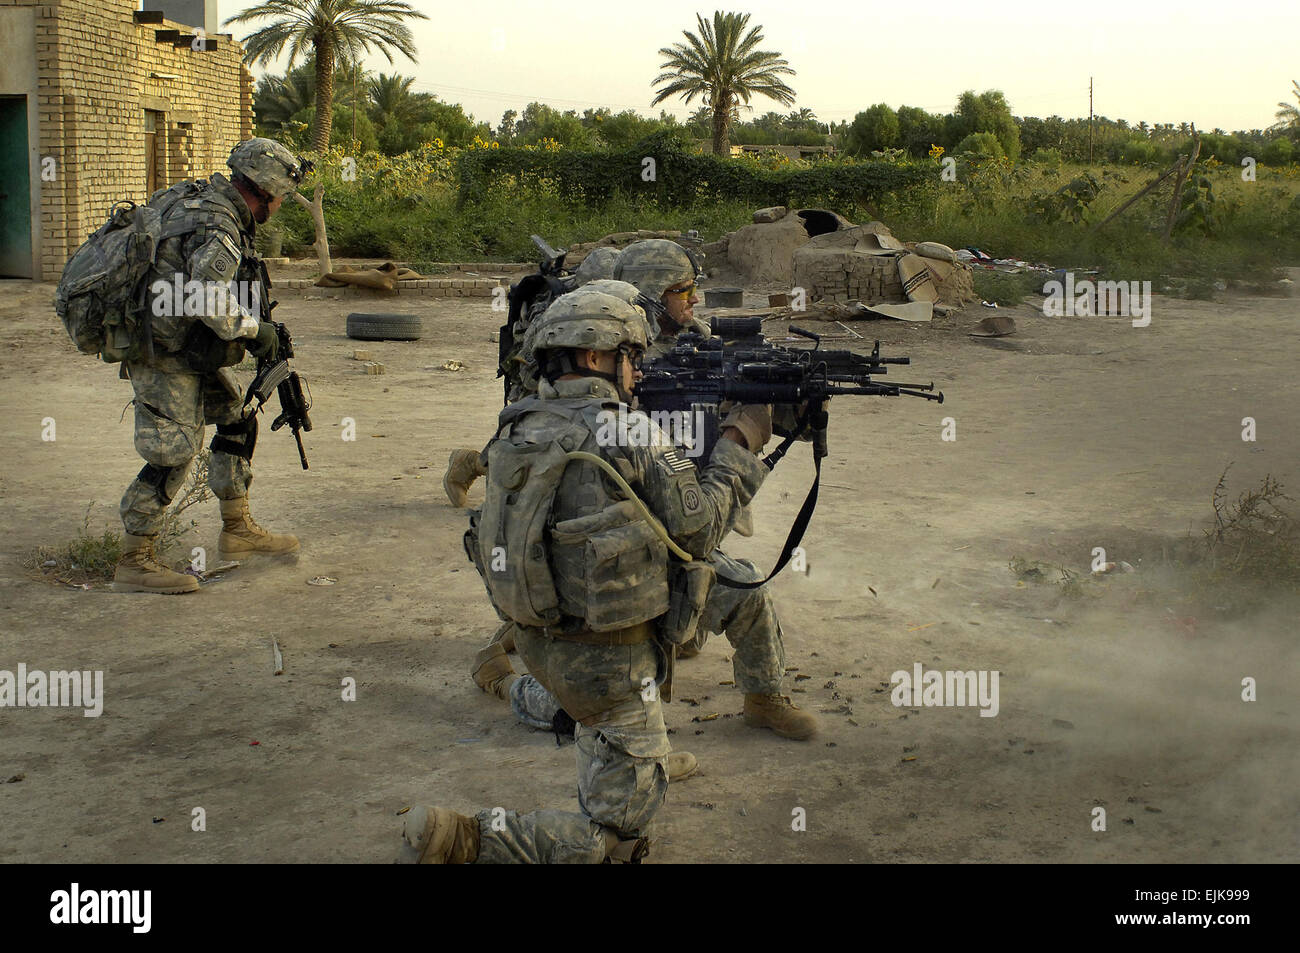 U.S. Army Soldiers of Bravo Troop, 5th Squadron, 73rd Cavalry Regiment, 3rd Brigade Combat Team, 82nd Airborne Division react to contact from insurgents during a mission in Al Haymer, Iraq, July 12, 2007.  Senior Airman Steve Czyz Stock Photo